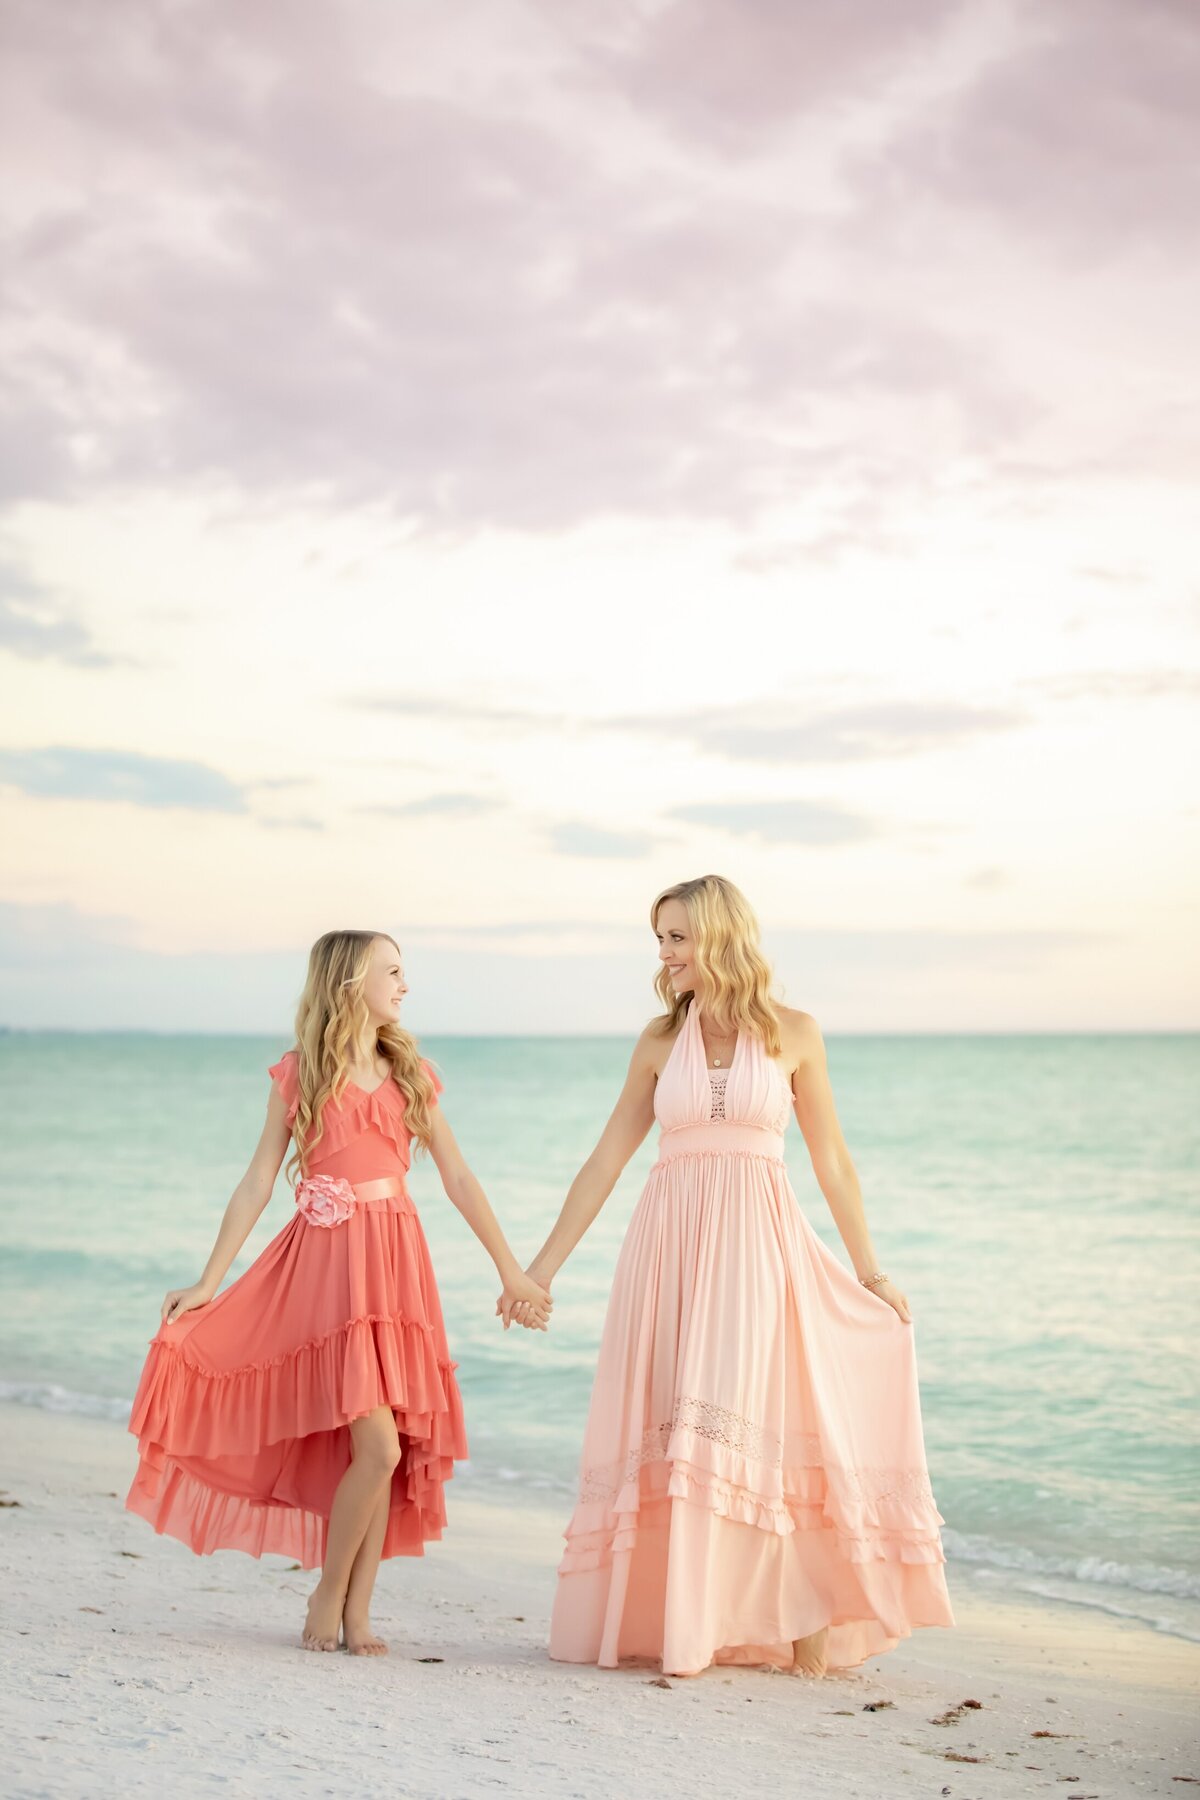 mother daughter portrait at the beach in pretty pink and coral dresses